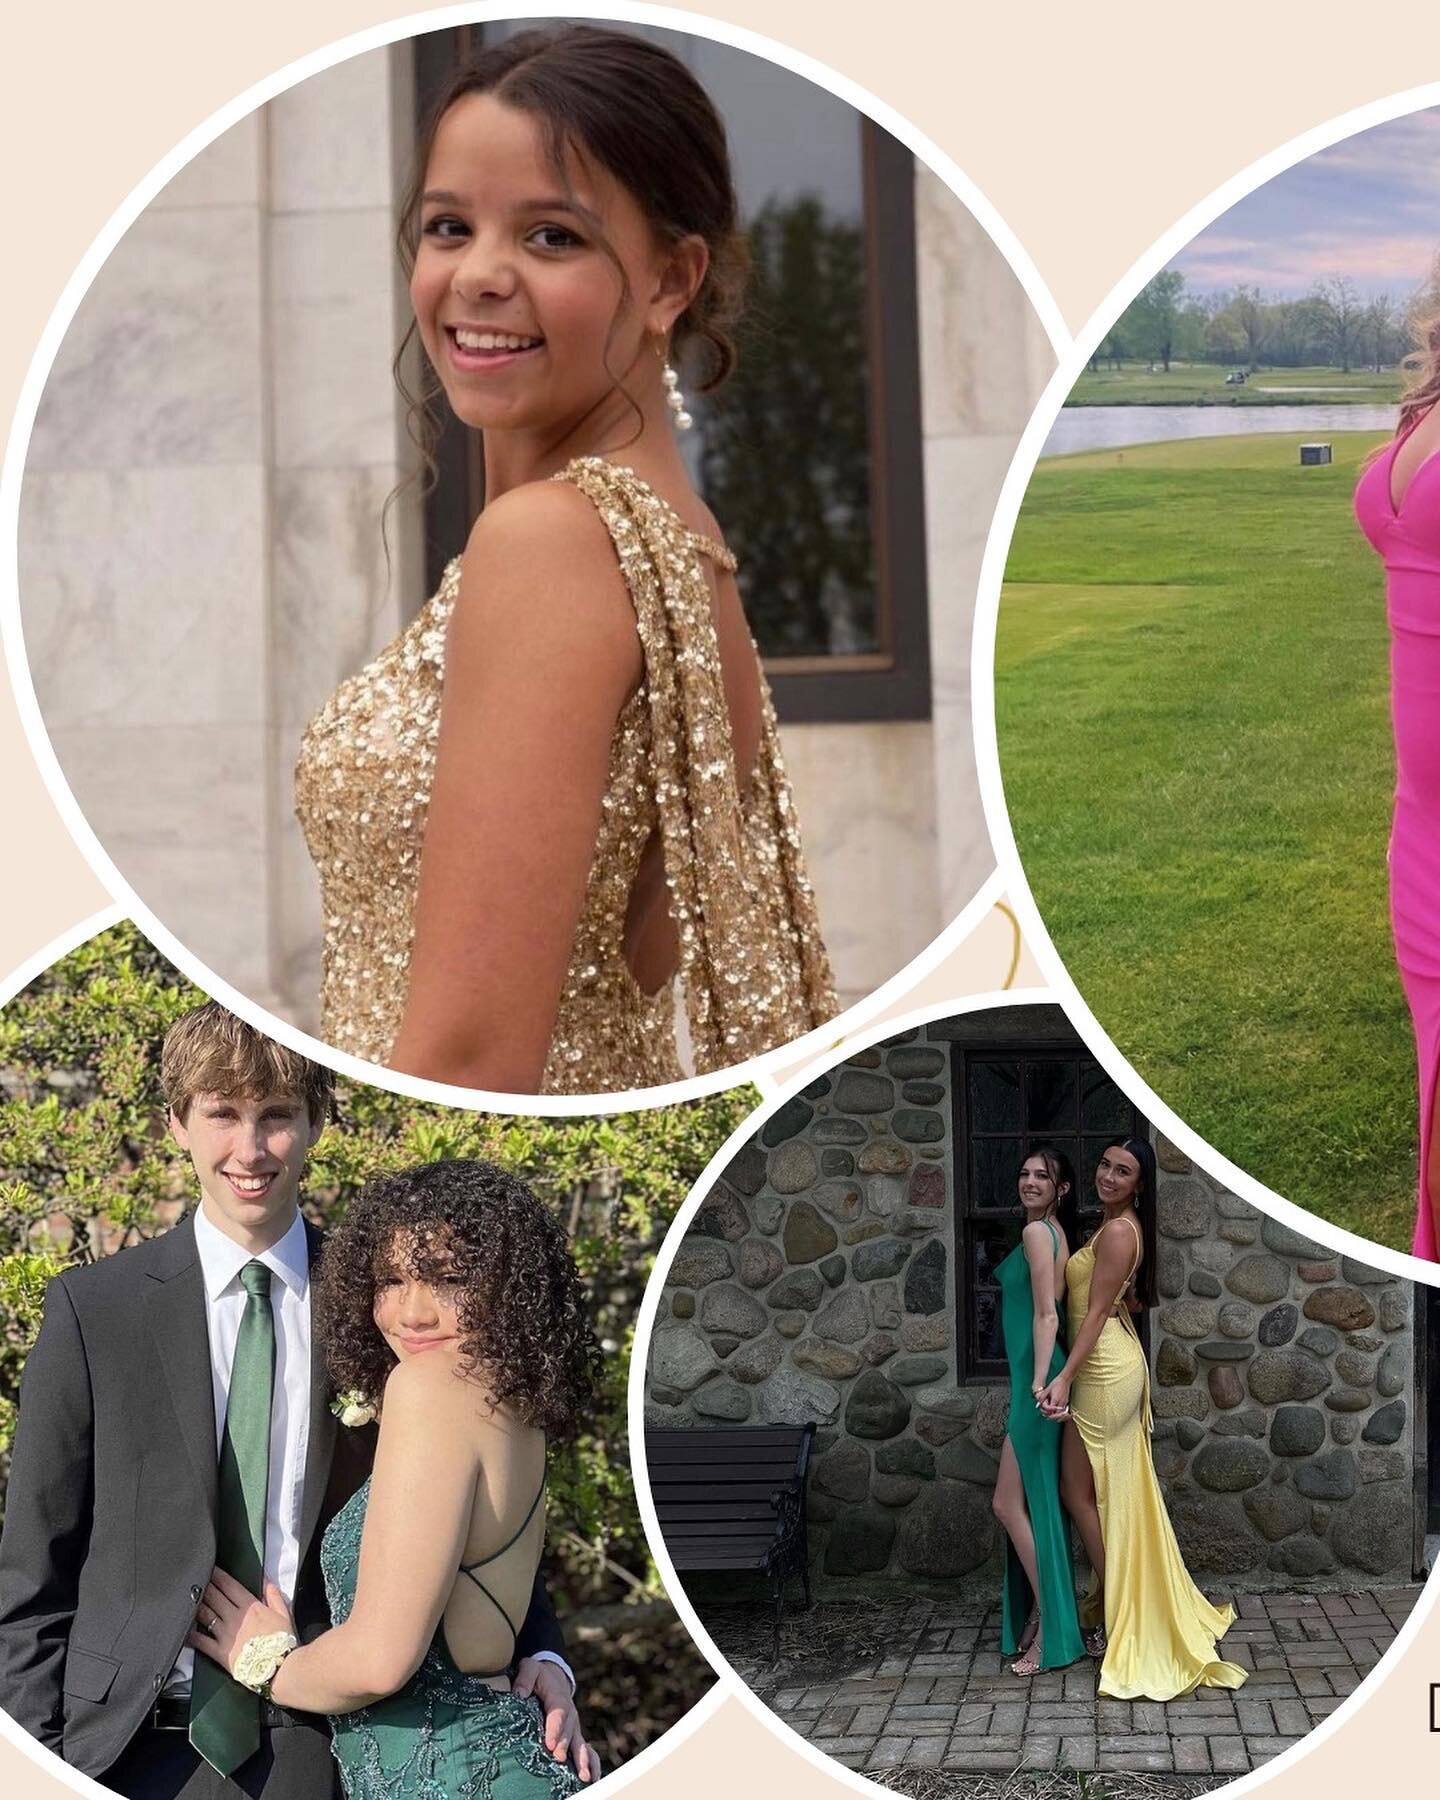 More snapshots of our prom cuties!!! You guys were all amazing to work with this season and look so good in these gowns!! Thank you for choosing to shop with us for this important dress! Hope your prom was memorable 💕